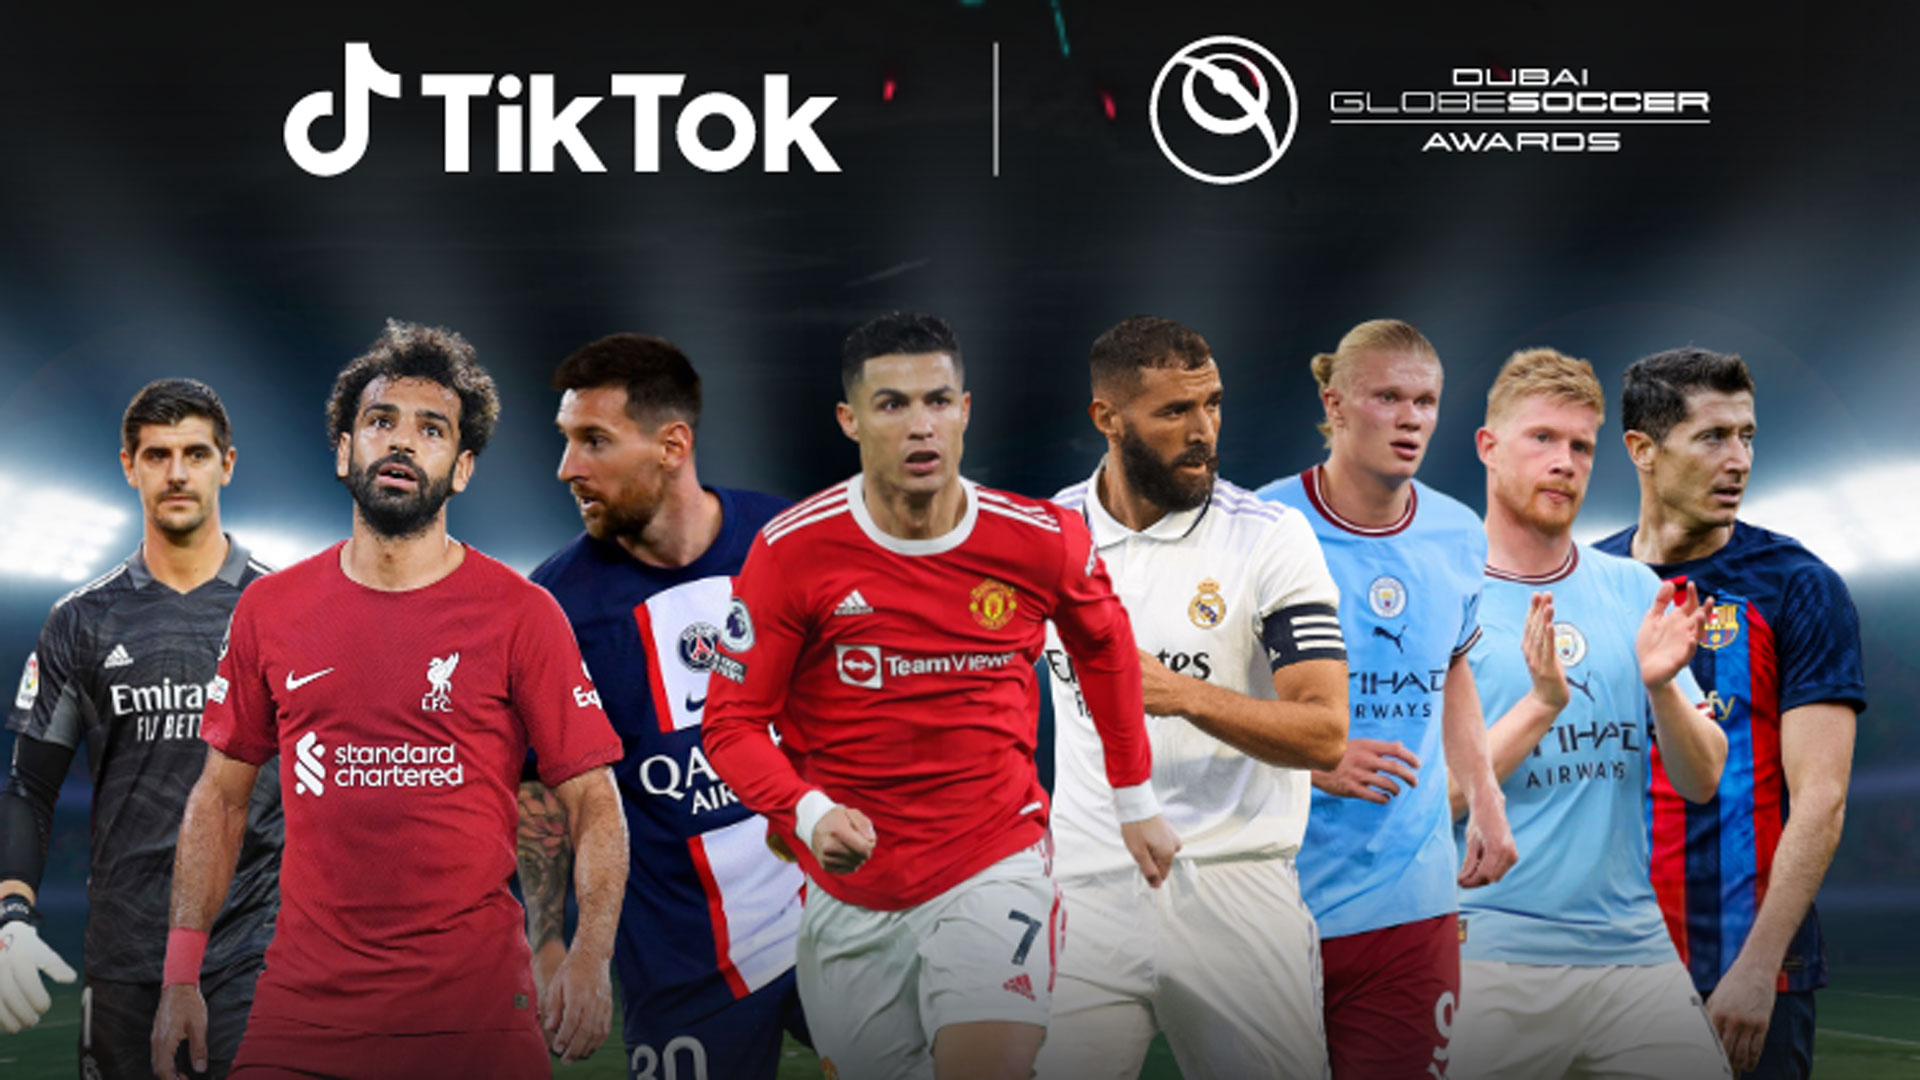 Teasing Drivkraft virtuel TikTok joins the 13th Edition of The Globe Soccer Awards and launches the “TikTok  Fans' Player of The Year 2022” Award | TikTok Newsroom